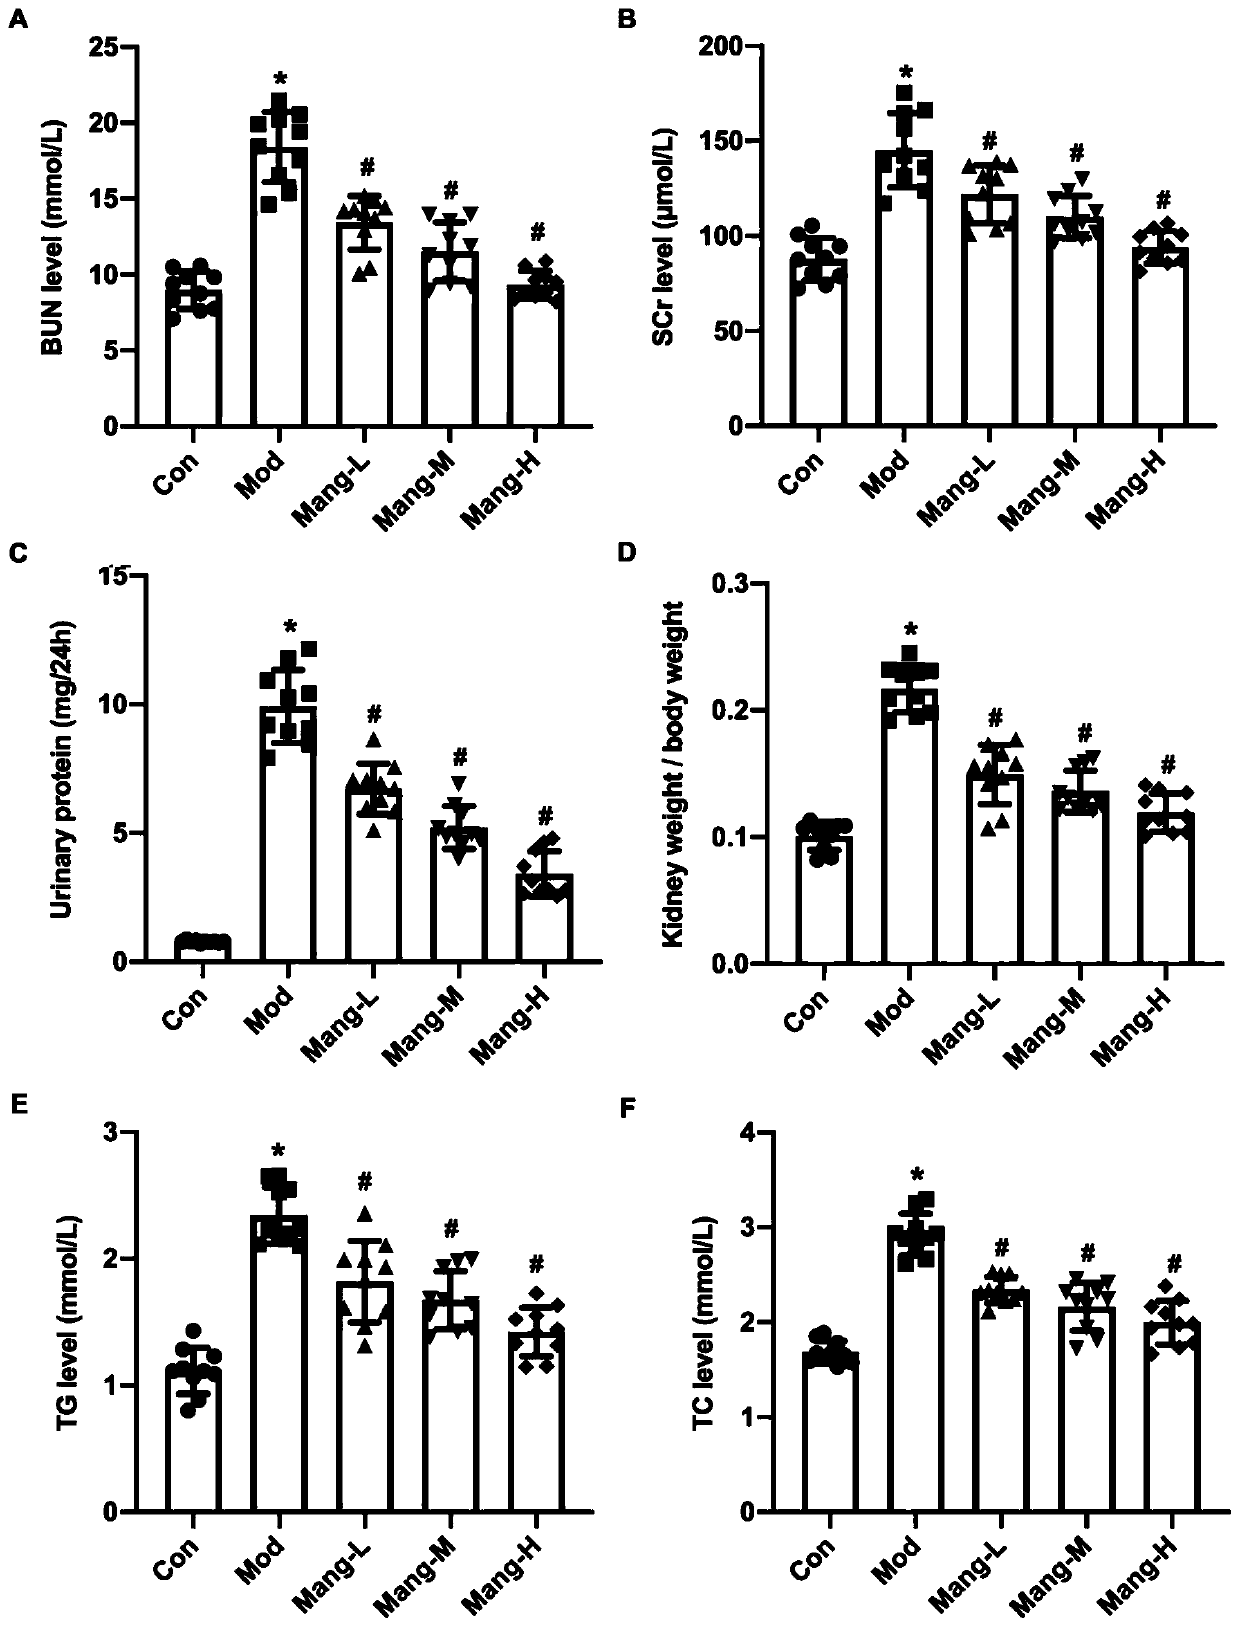 Research method for pharmacologic action of mangiferin on mouse diabetes